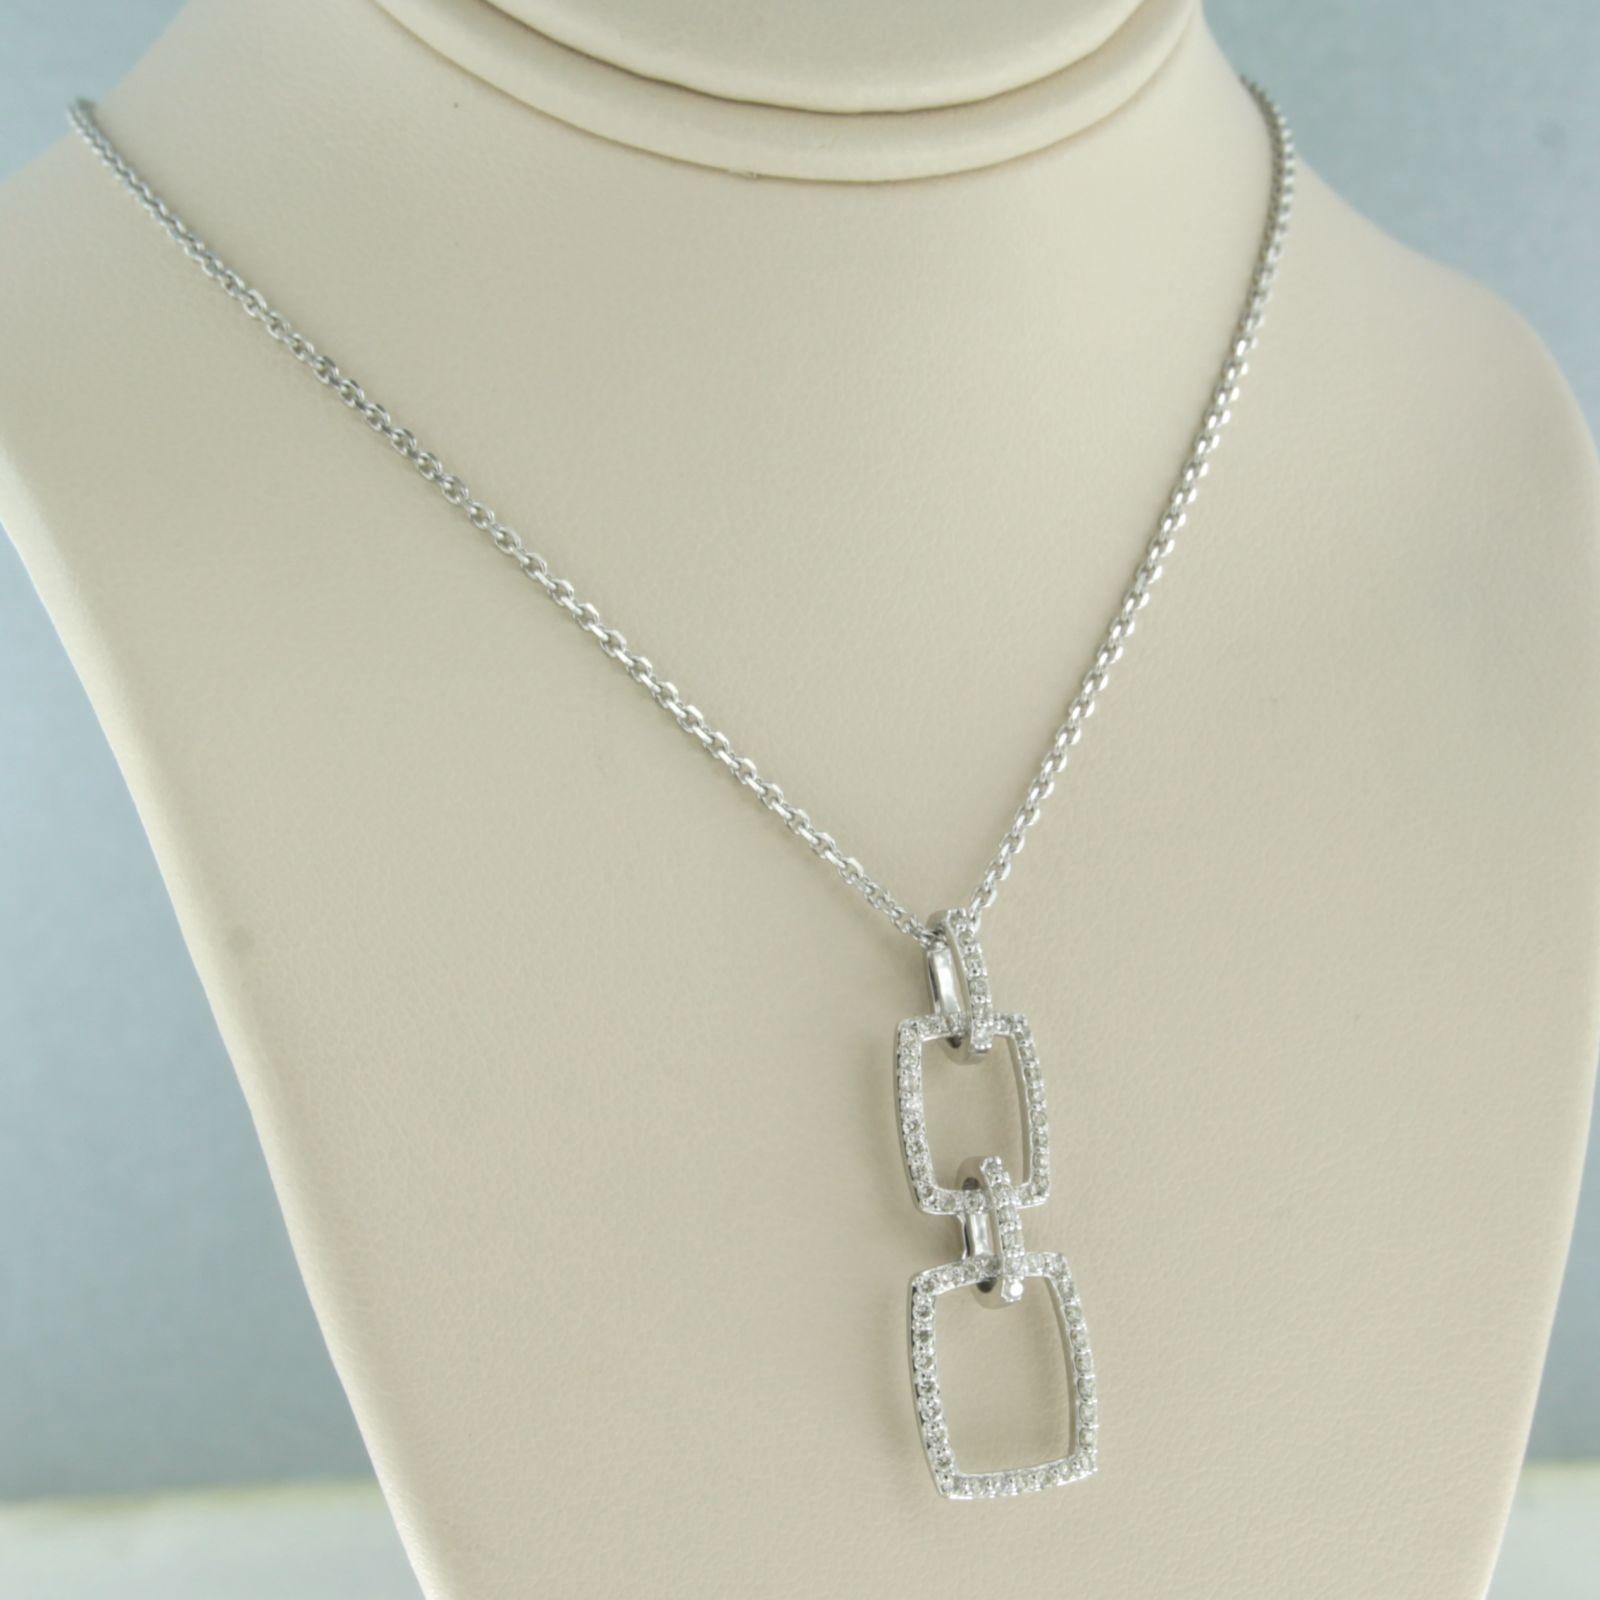 Modern Necklace and pendant set with diamonds 18k white gold 40 cm long For Sale